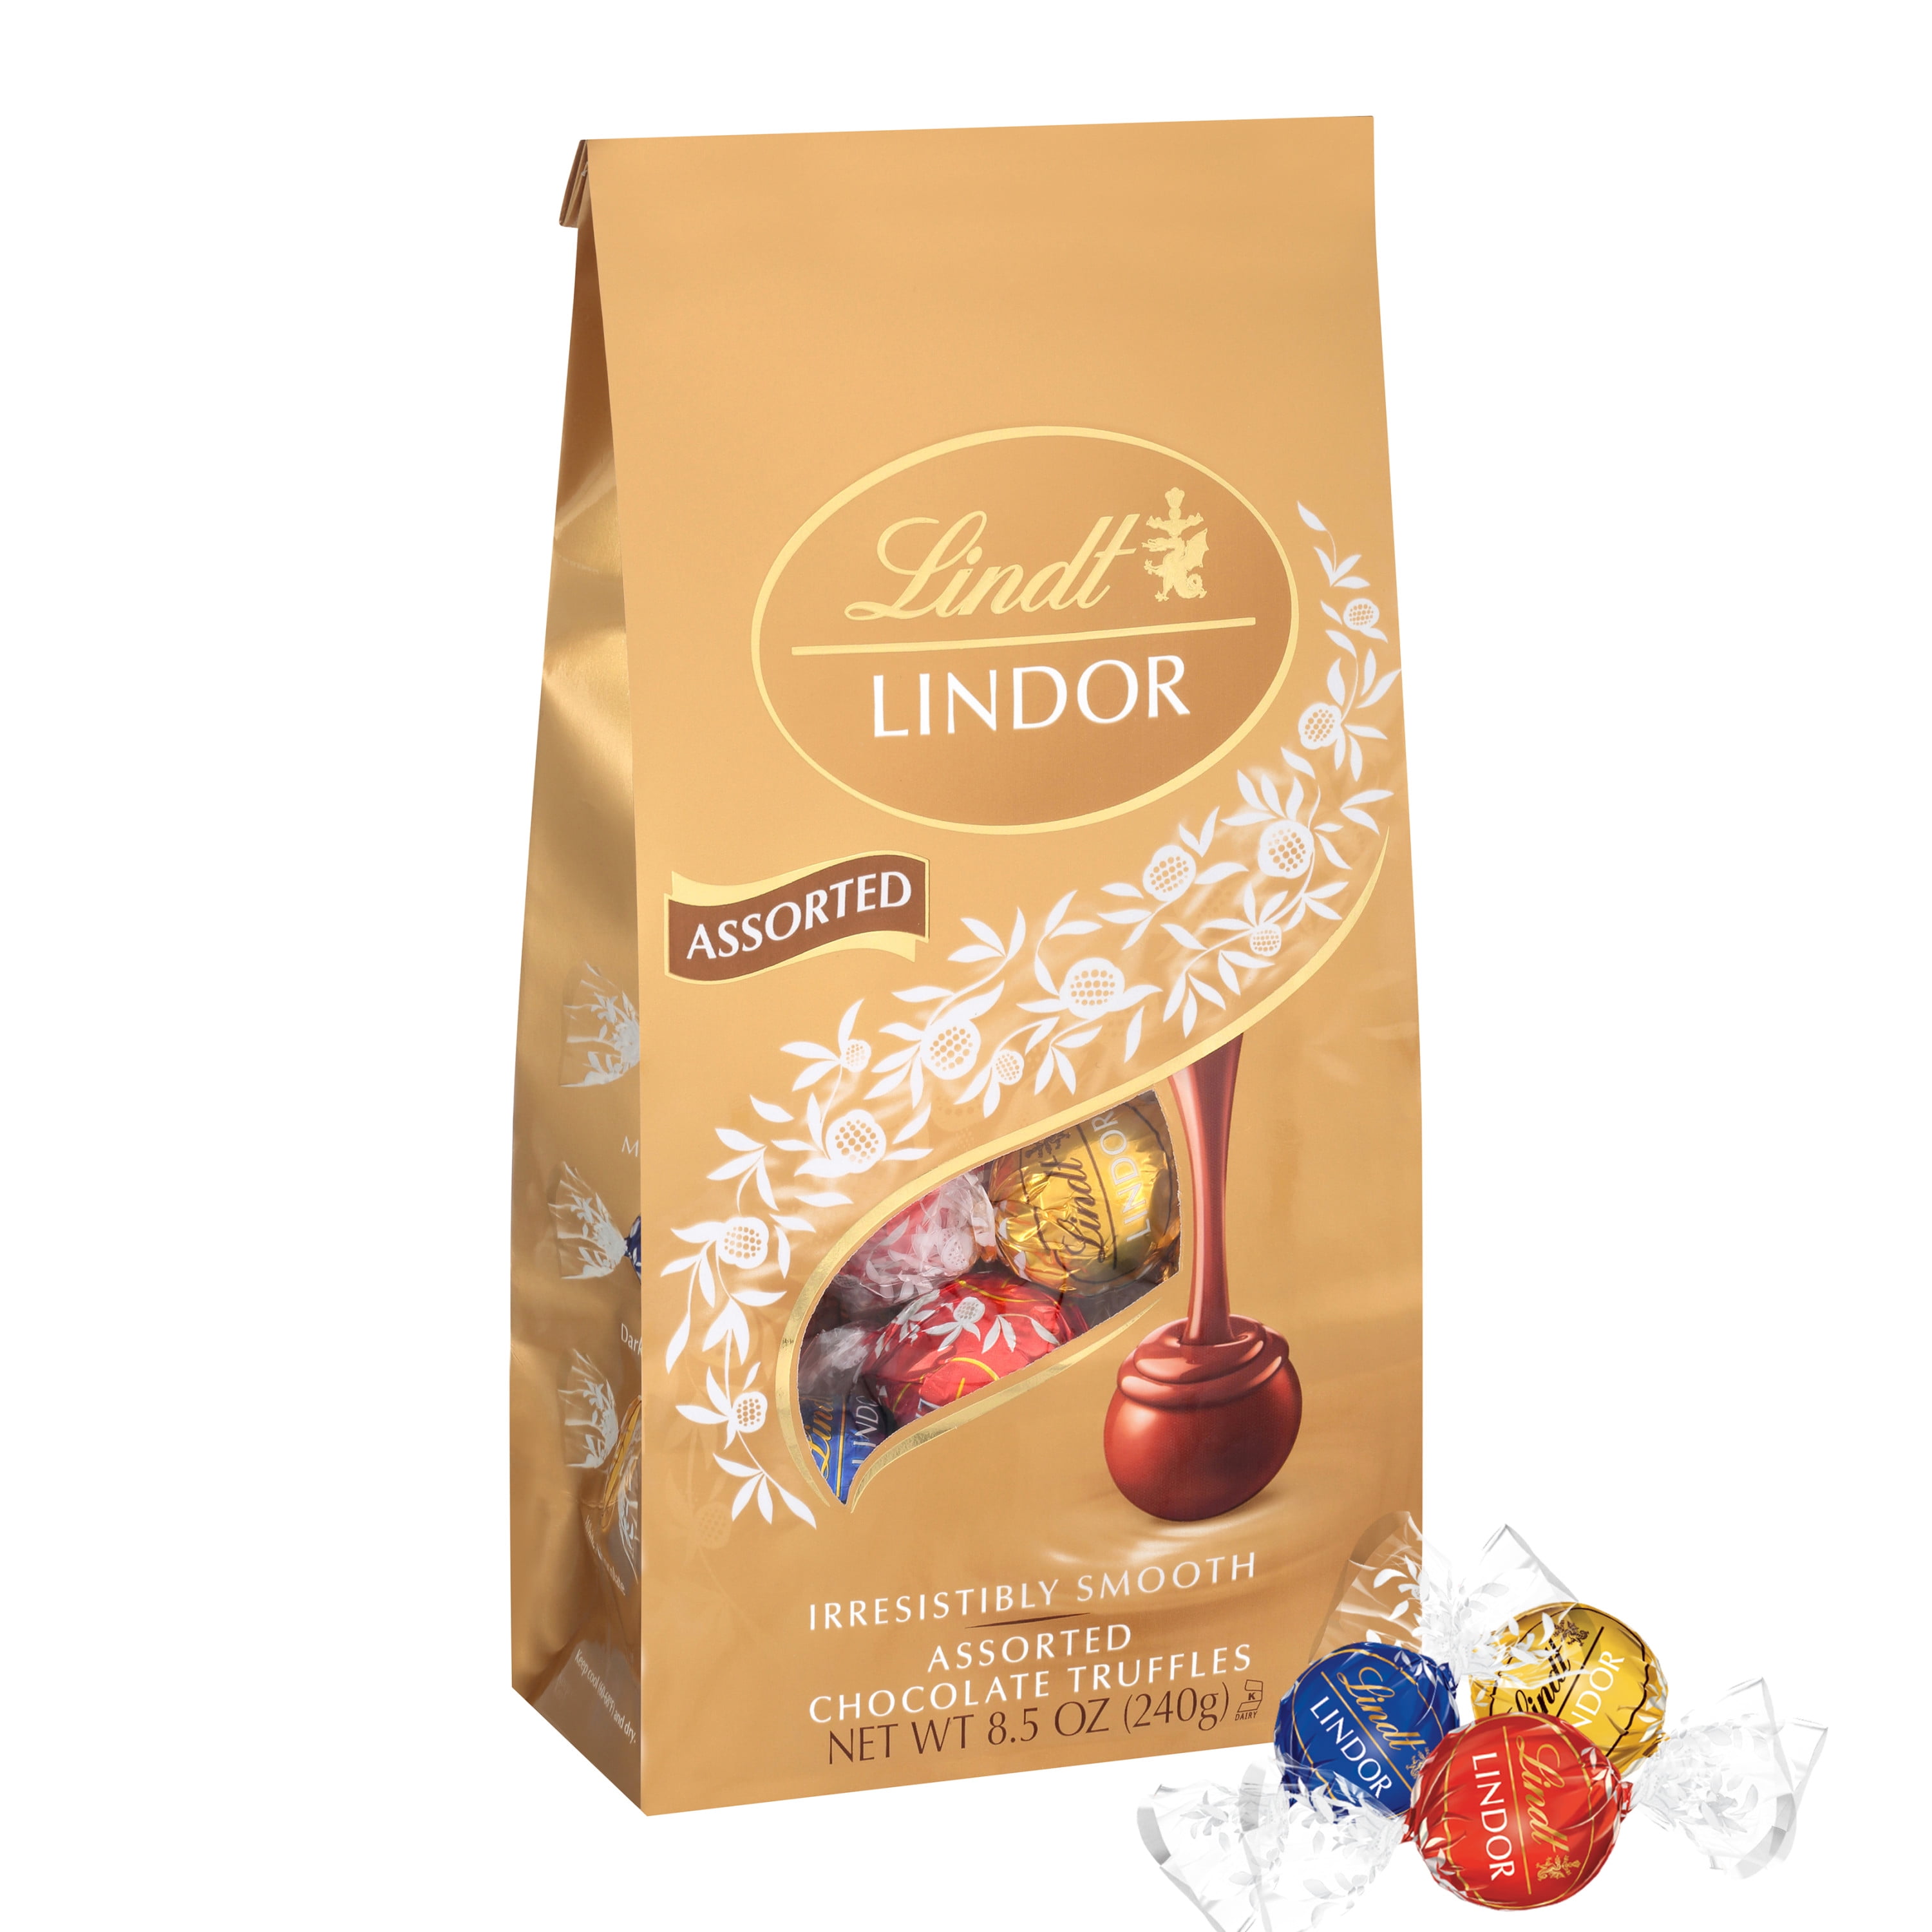 Lindt LINDOR, Assorted Chocolate Candy Truffles, Easter Chocolate, 8.5 oz. Bag, 1 Count